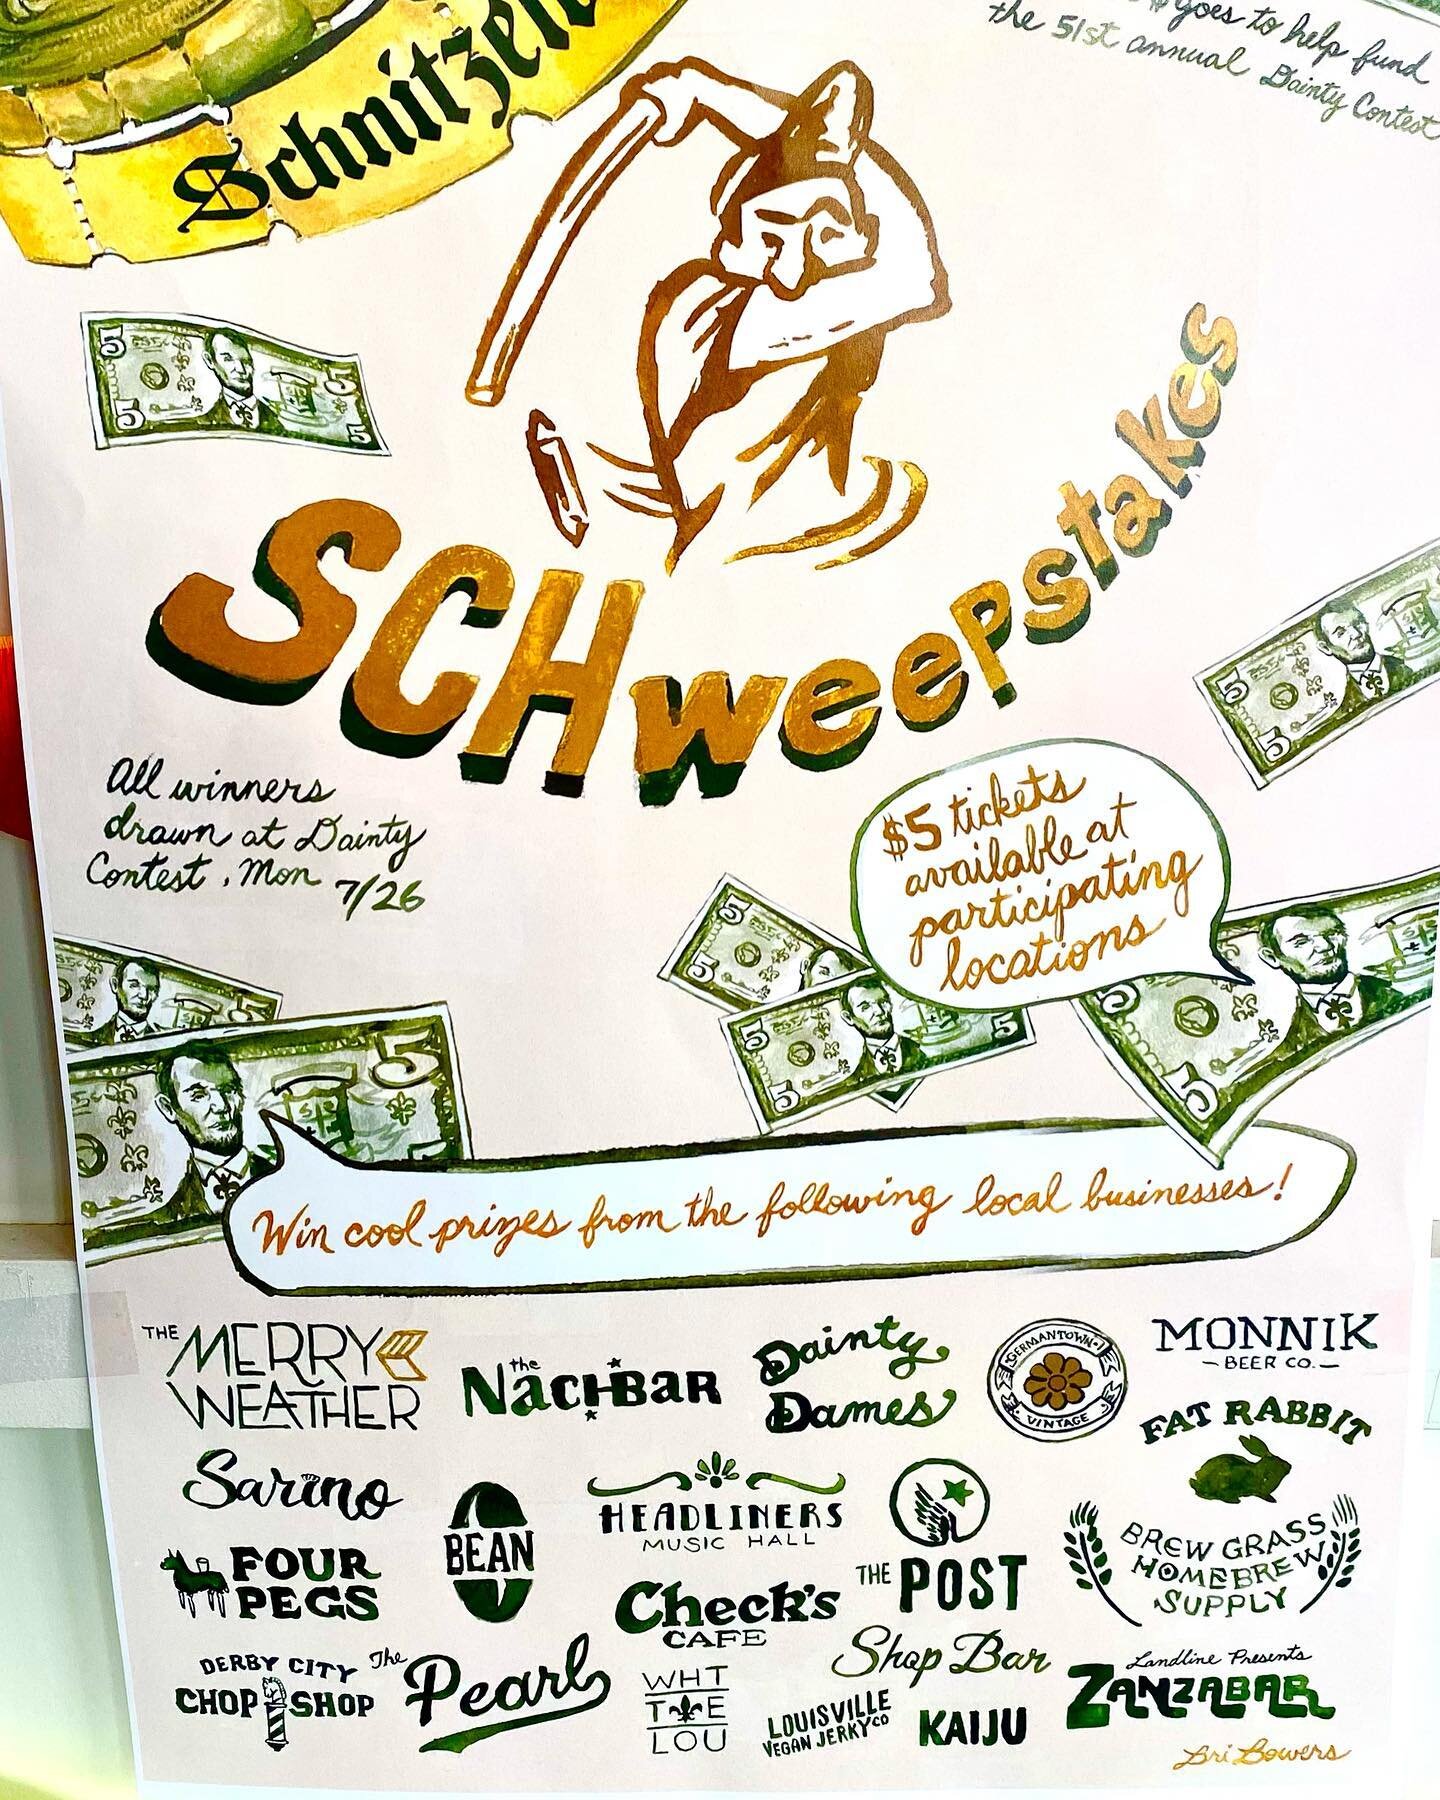 We still have a few Schweepstake tickets left! Get yours before it&rsquo;s too late. Only $5 for a chance at some great prizes. 🏆🏆🏆